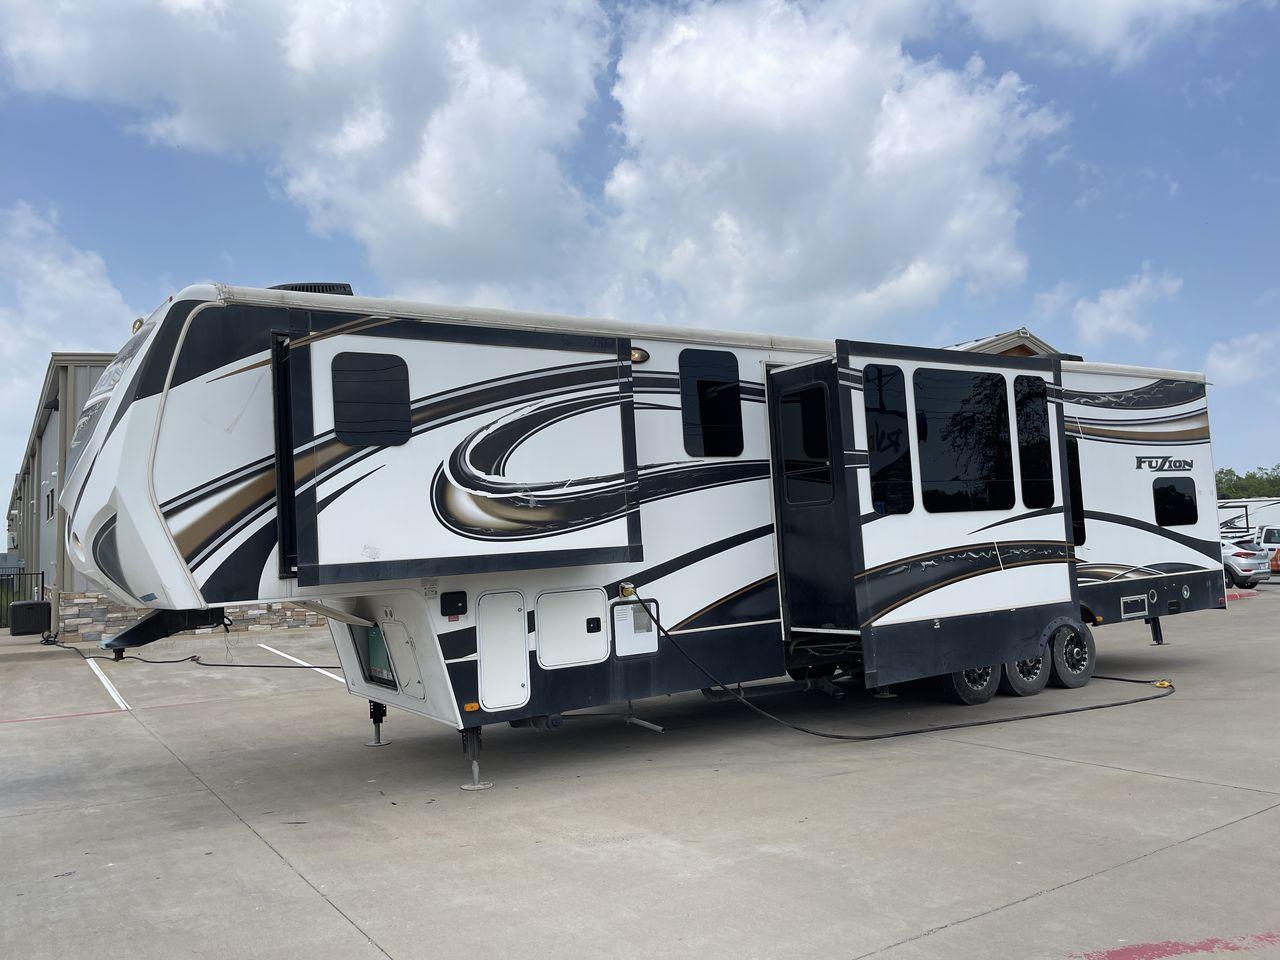 2014 WHITE KEYSTONE FUZION M-399 (4YDF39939EF) , Length: 41 ft. | Dry Weight: 14,100 lbs. | Gross Weight: 18,000 lbs. | Slides: 3 transmission, located at 4319 N Main St, Cleburne, TX, 76033, (817) 678-5133, 32.385960, -97.391212 - The 2014 Keystone Fuzion M-399 offers exceptional value for its price. With its white exterior color, this RV stands out on the road and is sure to turn heads wherever you go. Measuring 41 ft. in length, this toy hauler provides ample space for you and your loved ones to relax and enjoy your travels - Photo #25